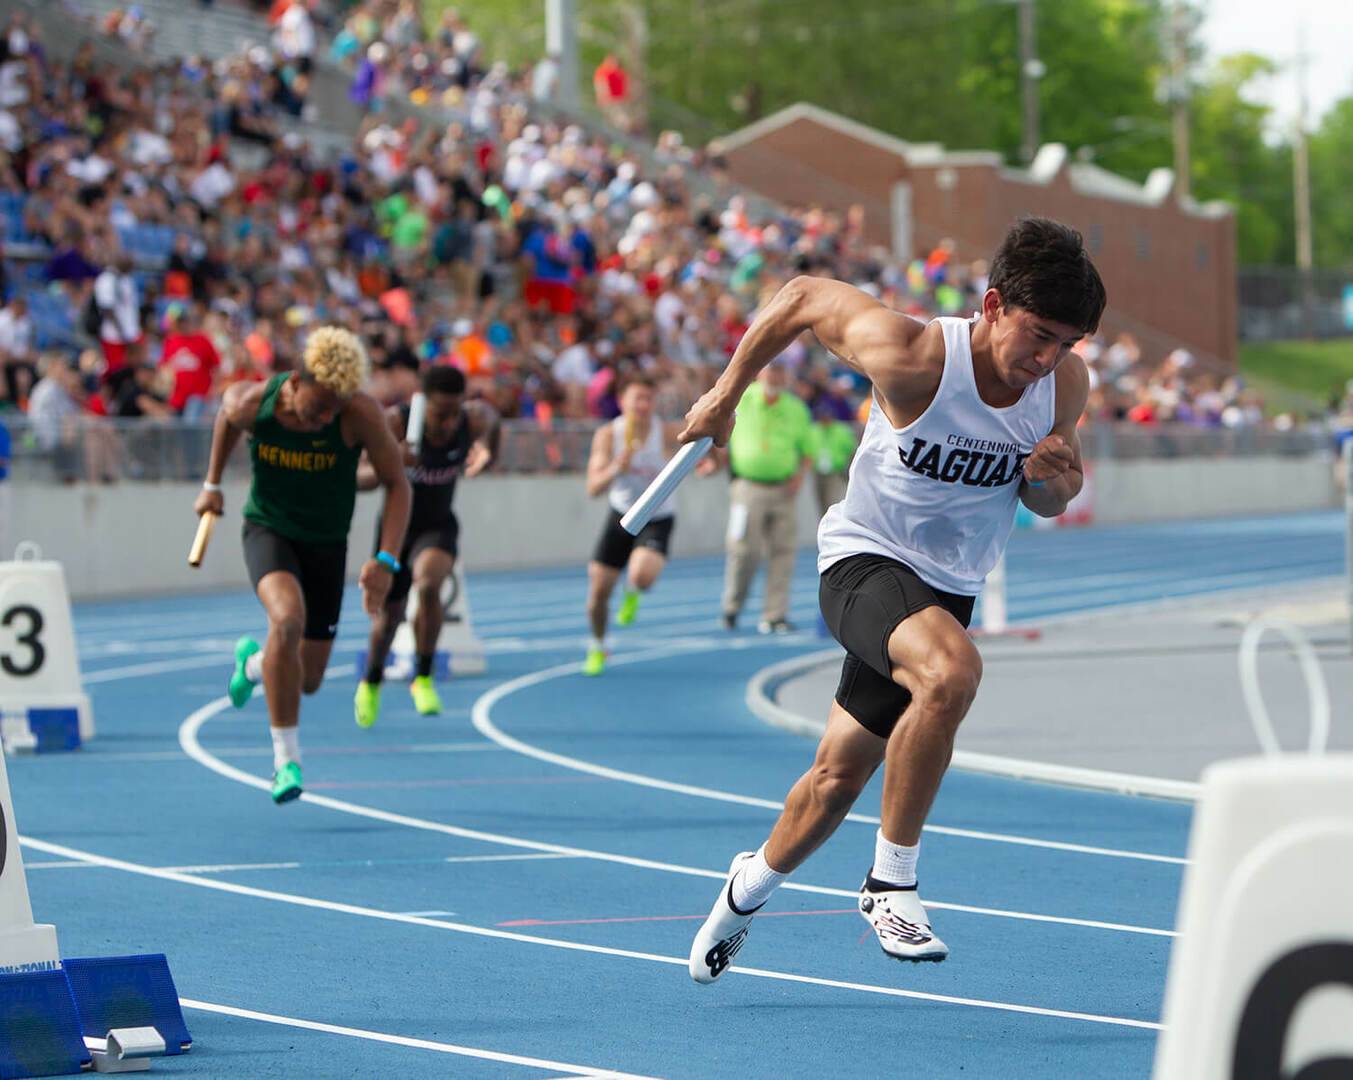 Track & Field: 2021 State Qualifying Meet Sites